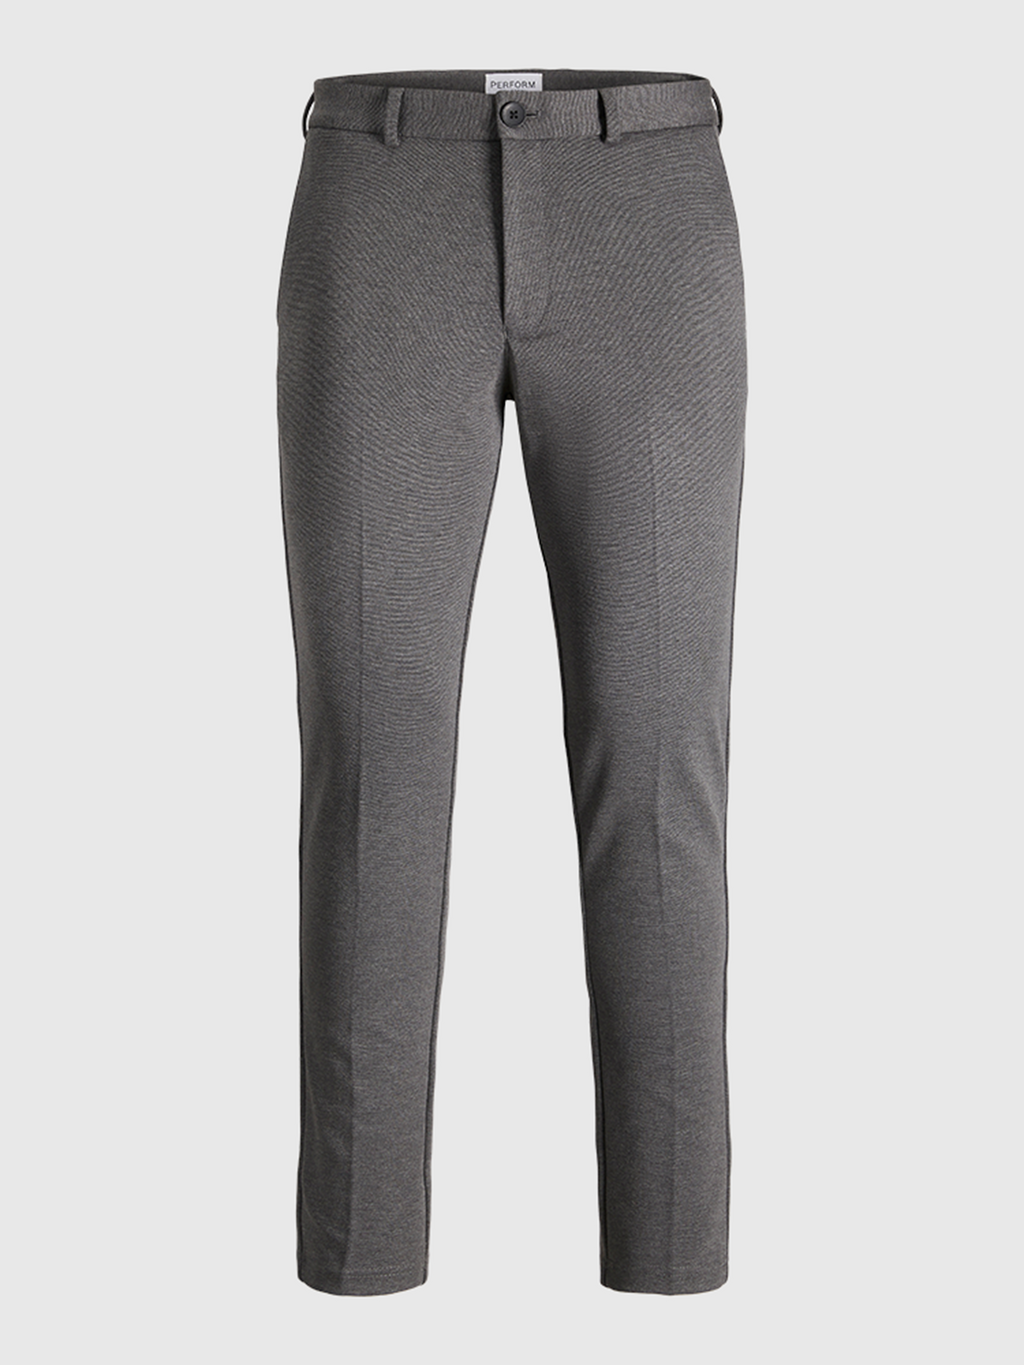 Performance Trousers (Regular) - Package Deal (2 pcs.)